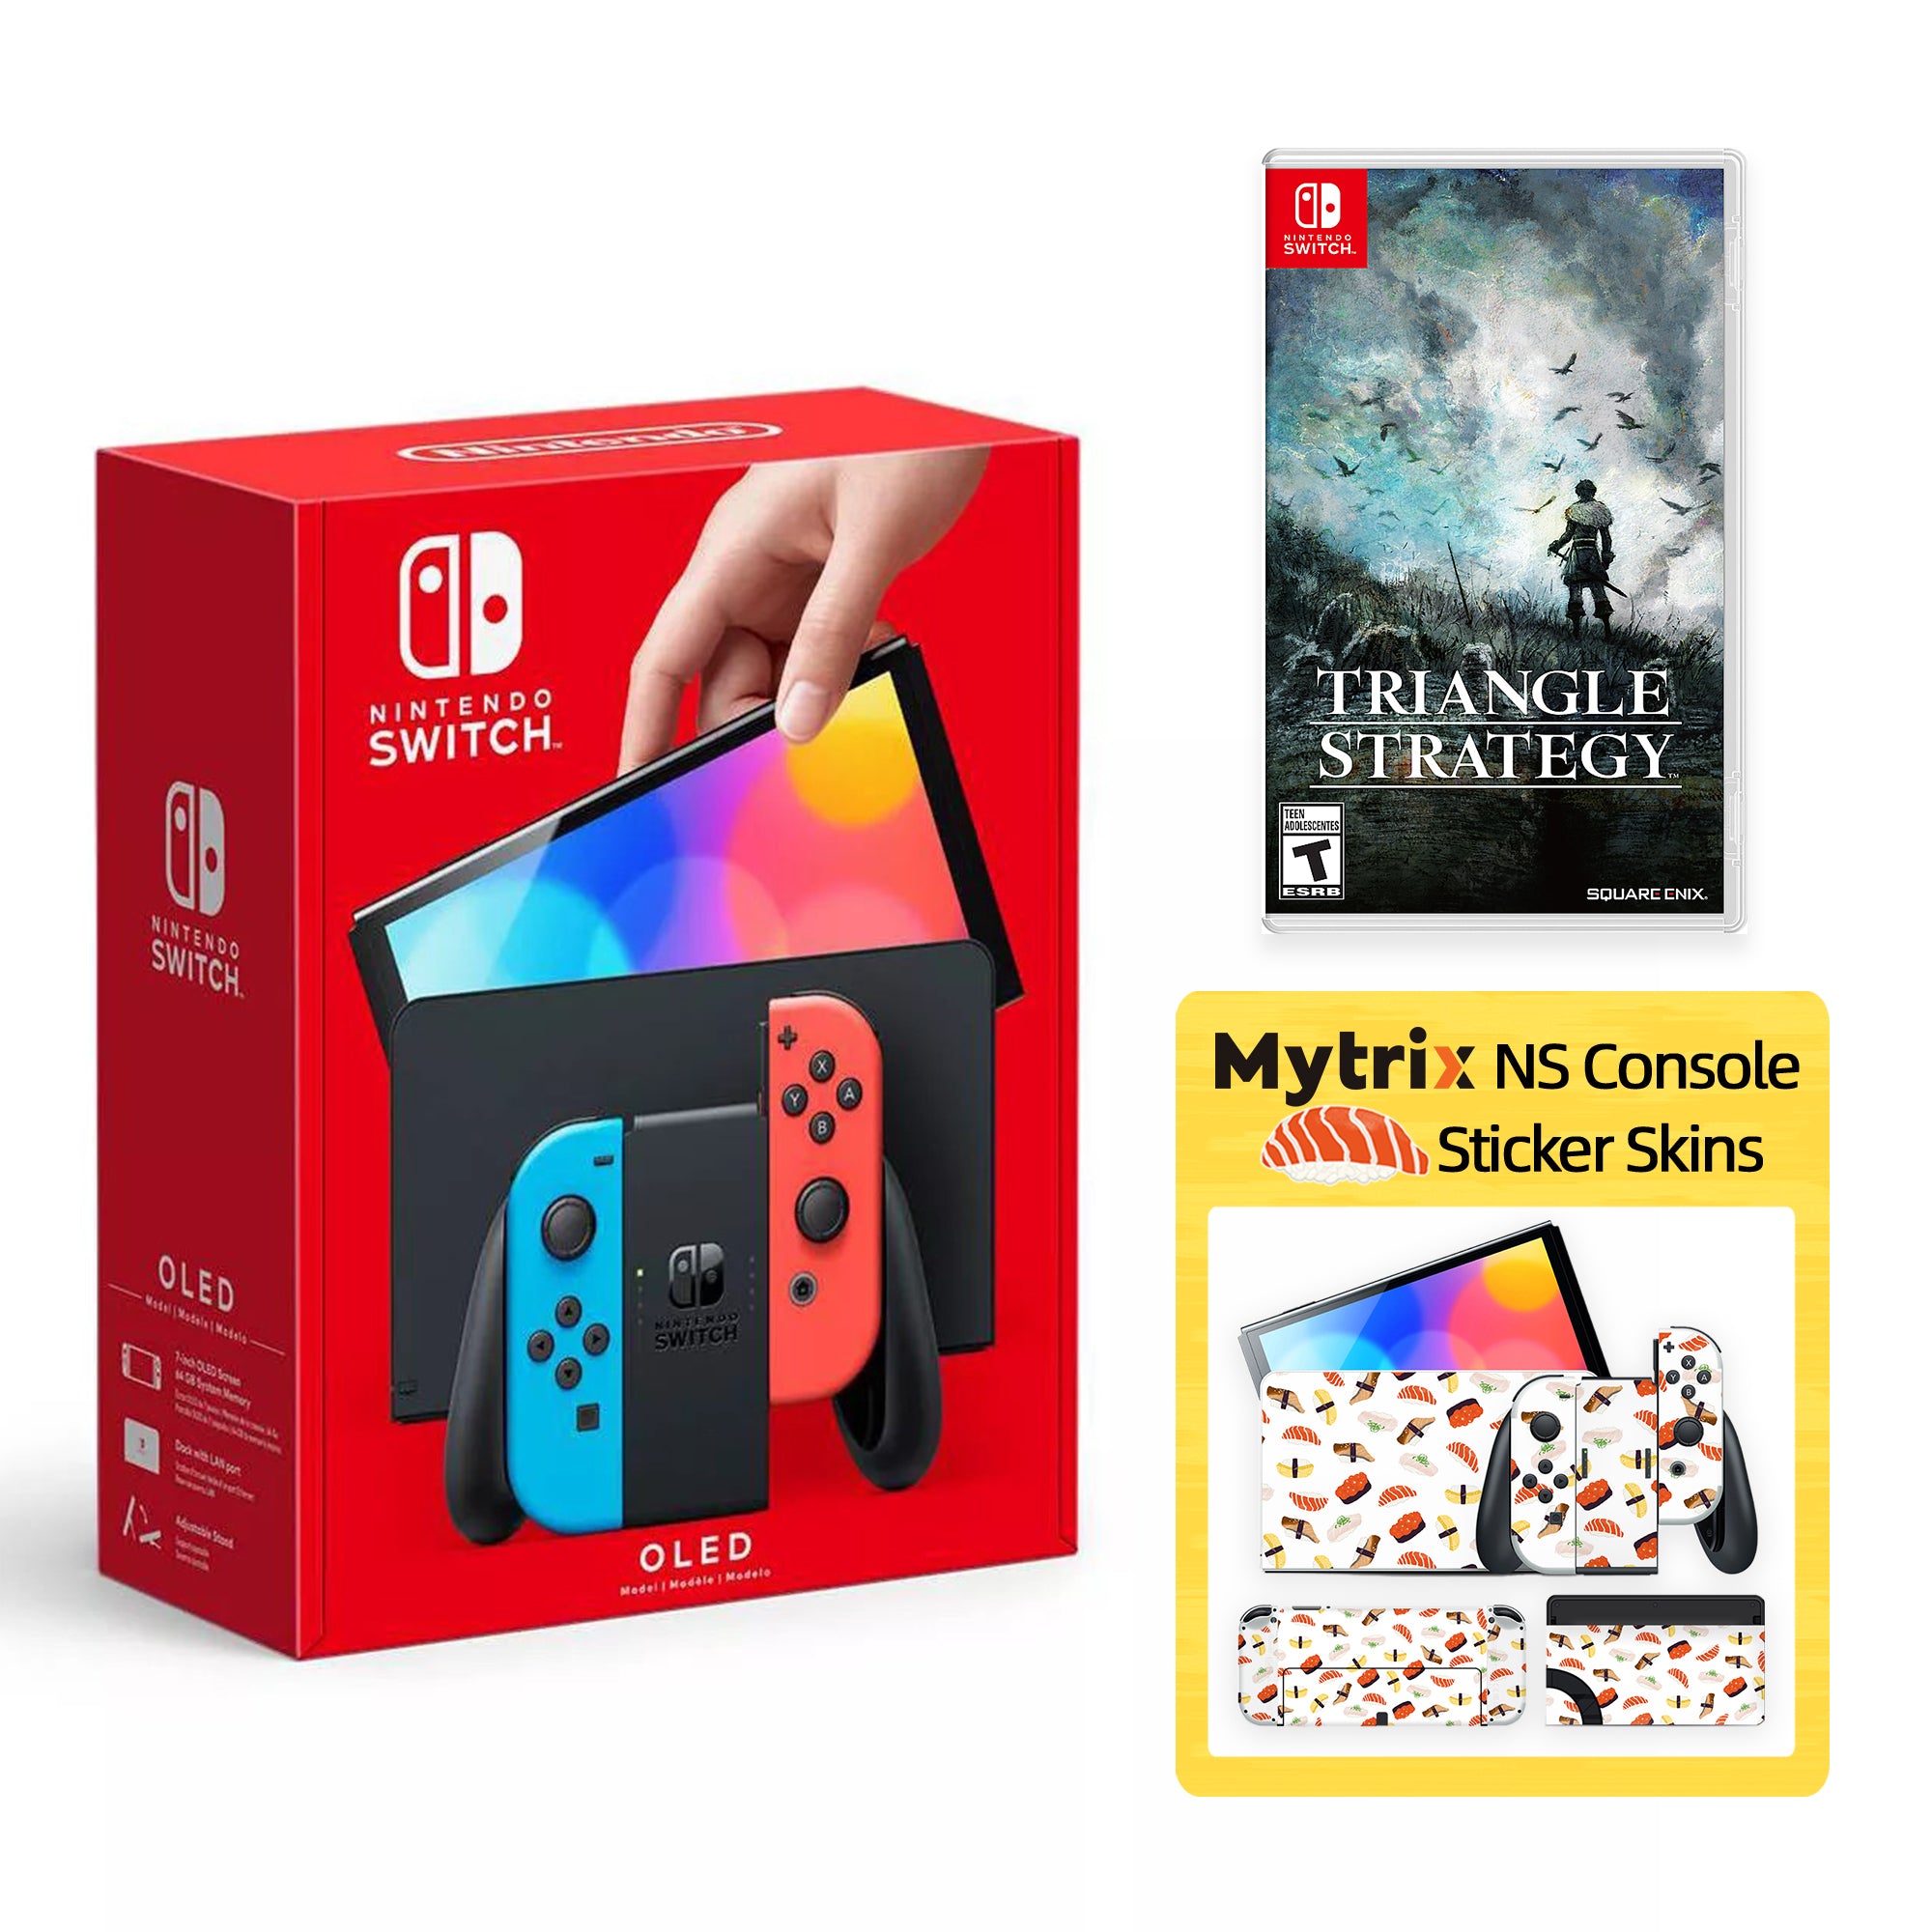 2022 New Nintendo Switch OLED Model Neon Red Blue Joy Con 64GB Console Improved HD Screen & LAN-Port Dock with Triangle Strategy, Mytrix Full Body Skin Sticker - Sushi Set